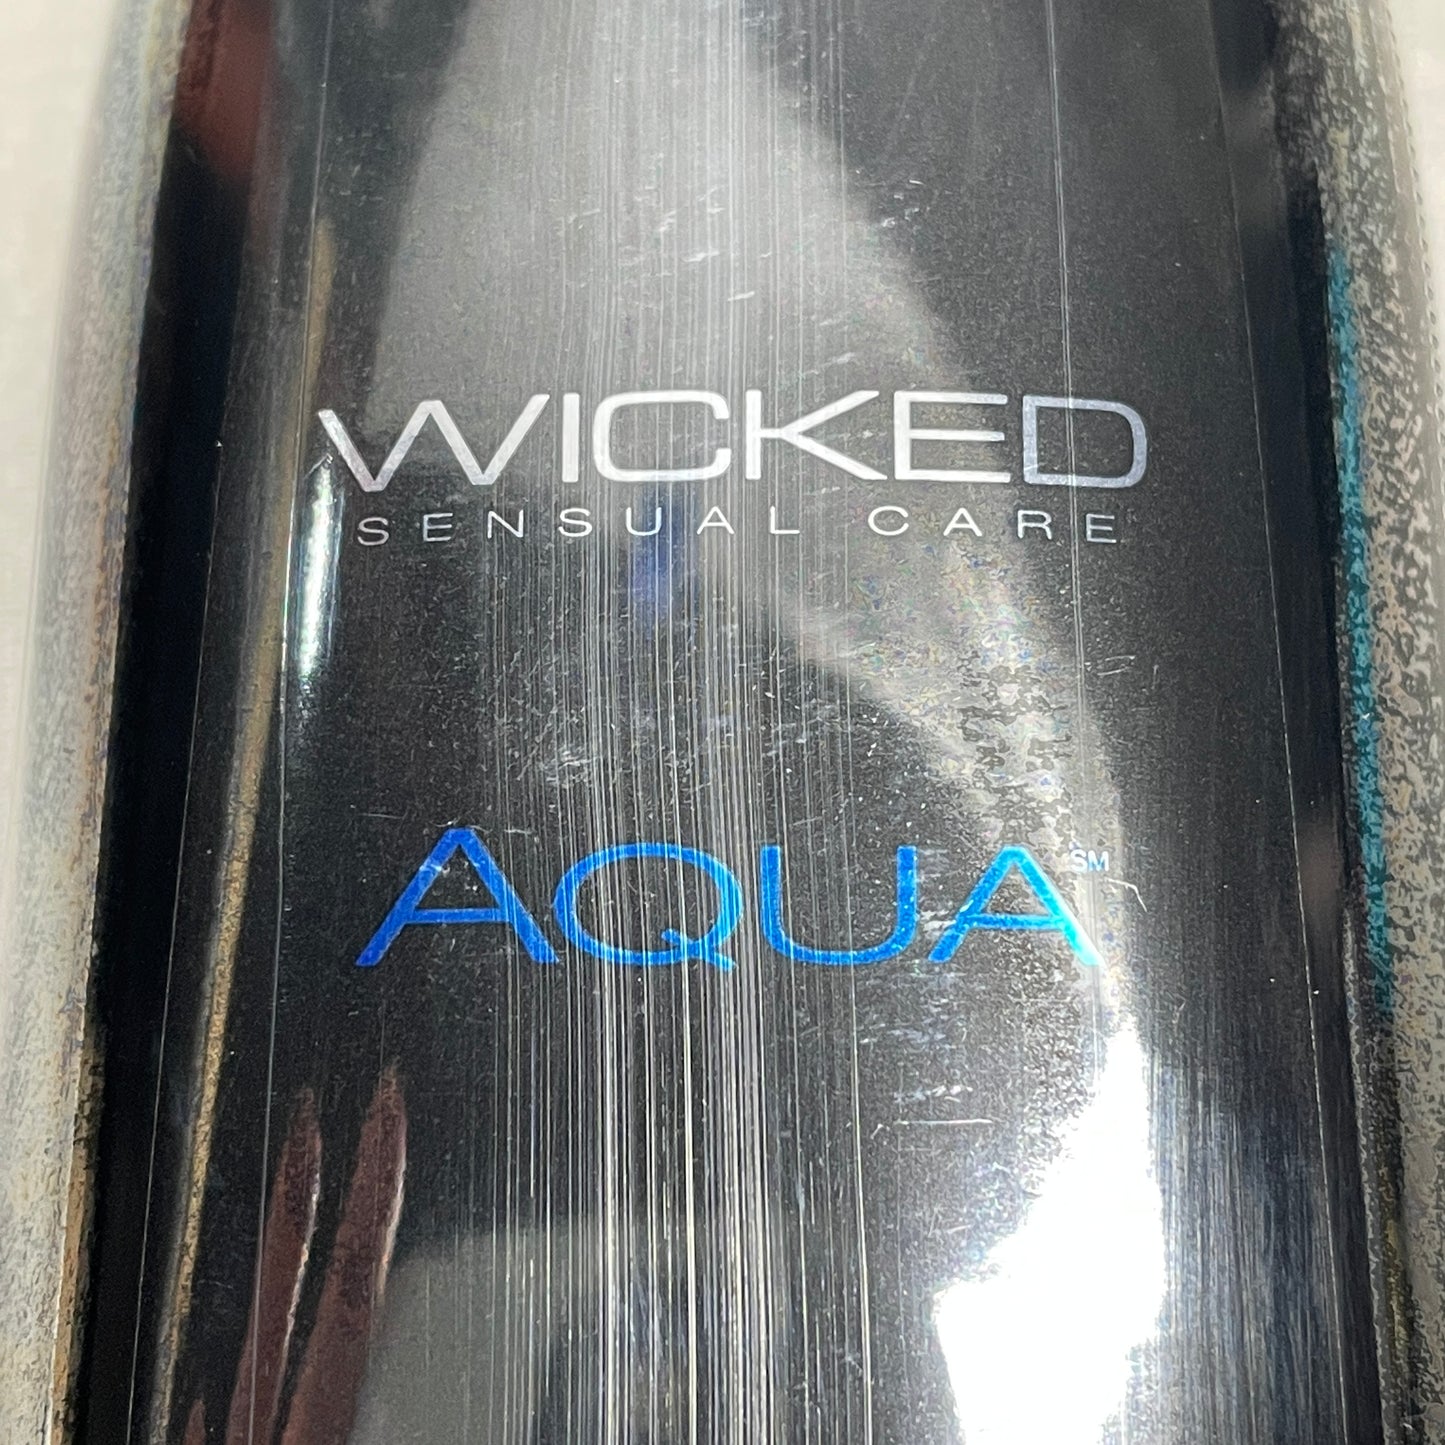 WICKED SENSUAL CARE Aqua Fragrance Free Water Based Intimate Lubricant 8.5 oz Exp. 12/23 (New)